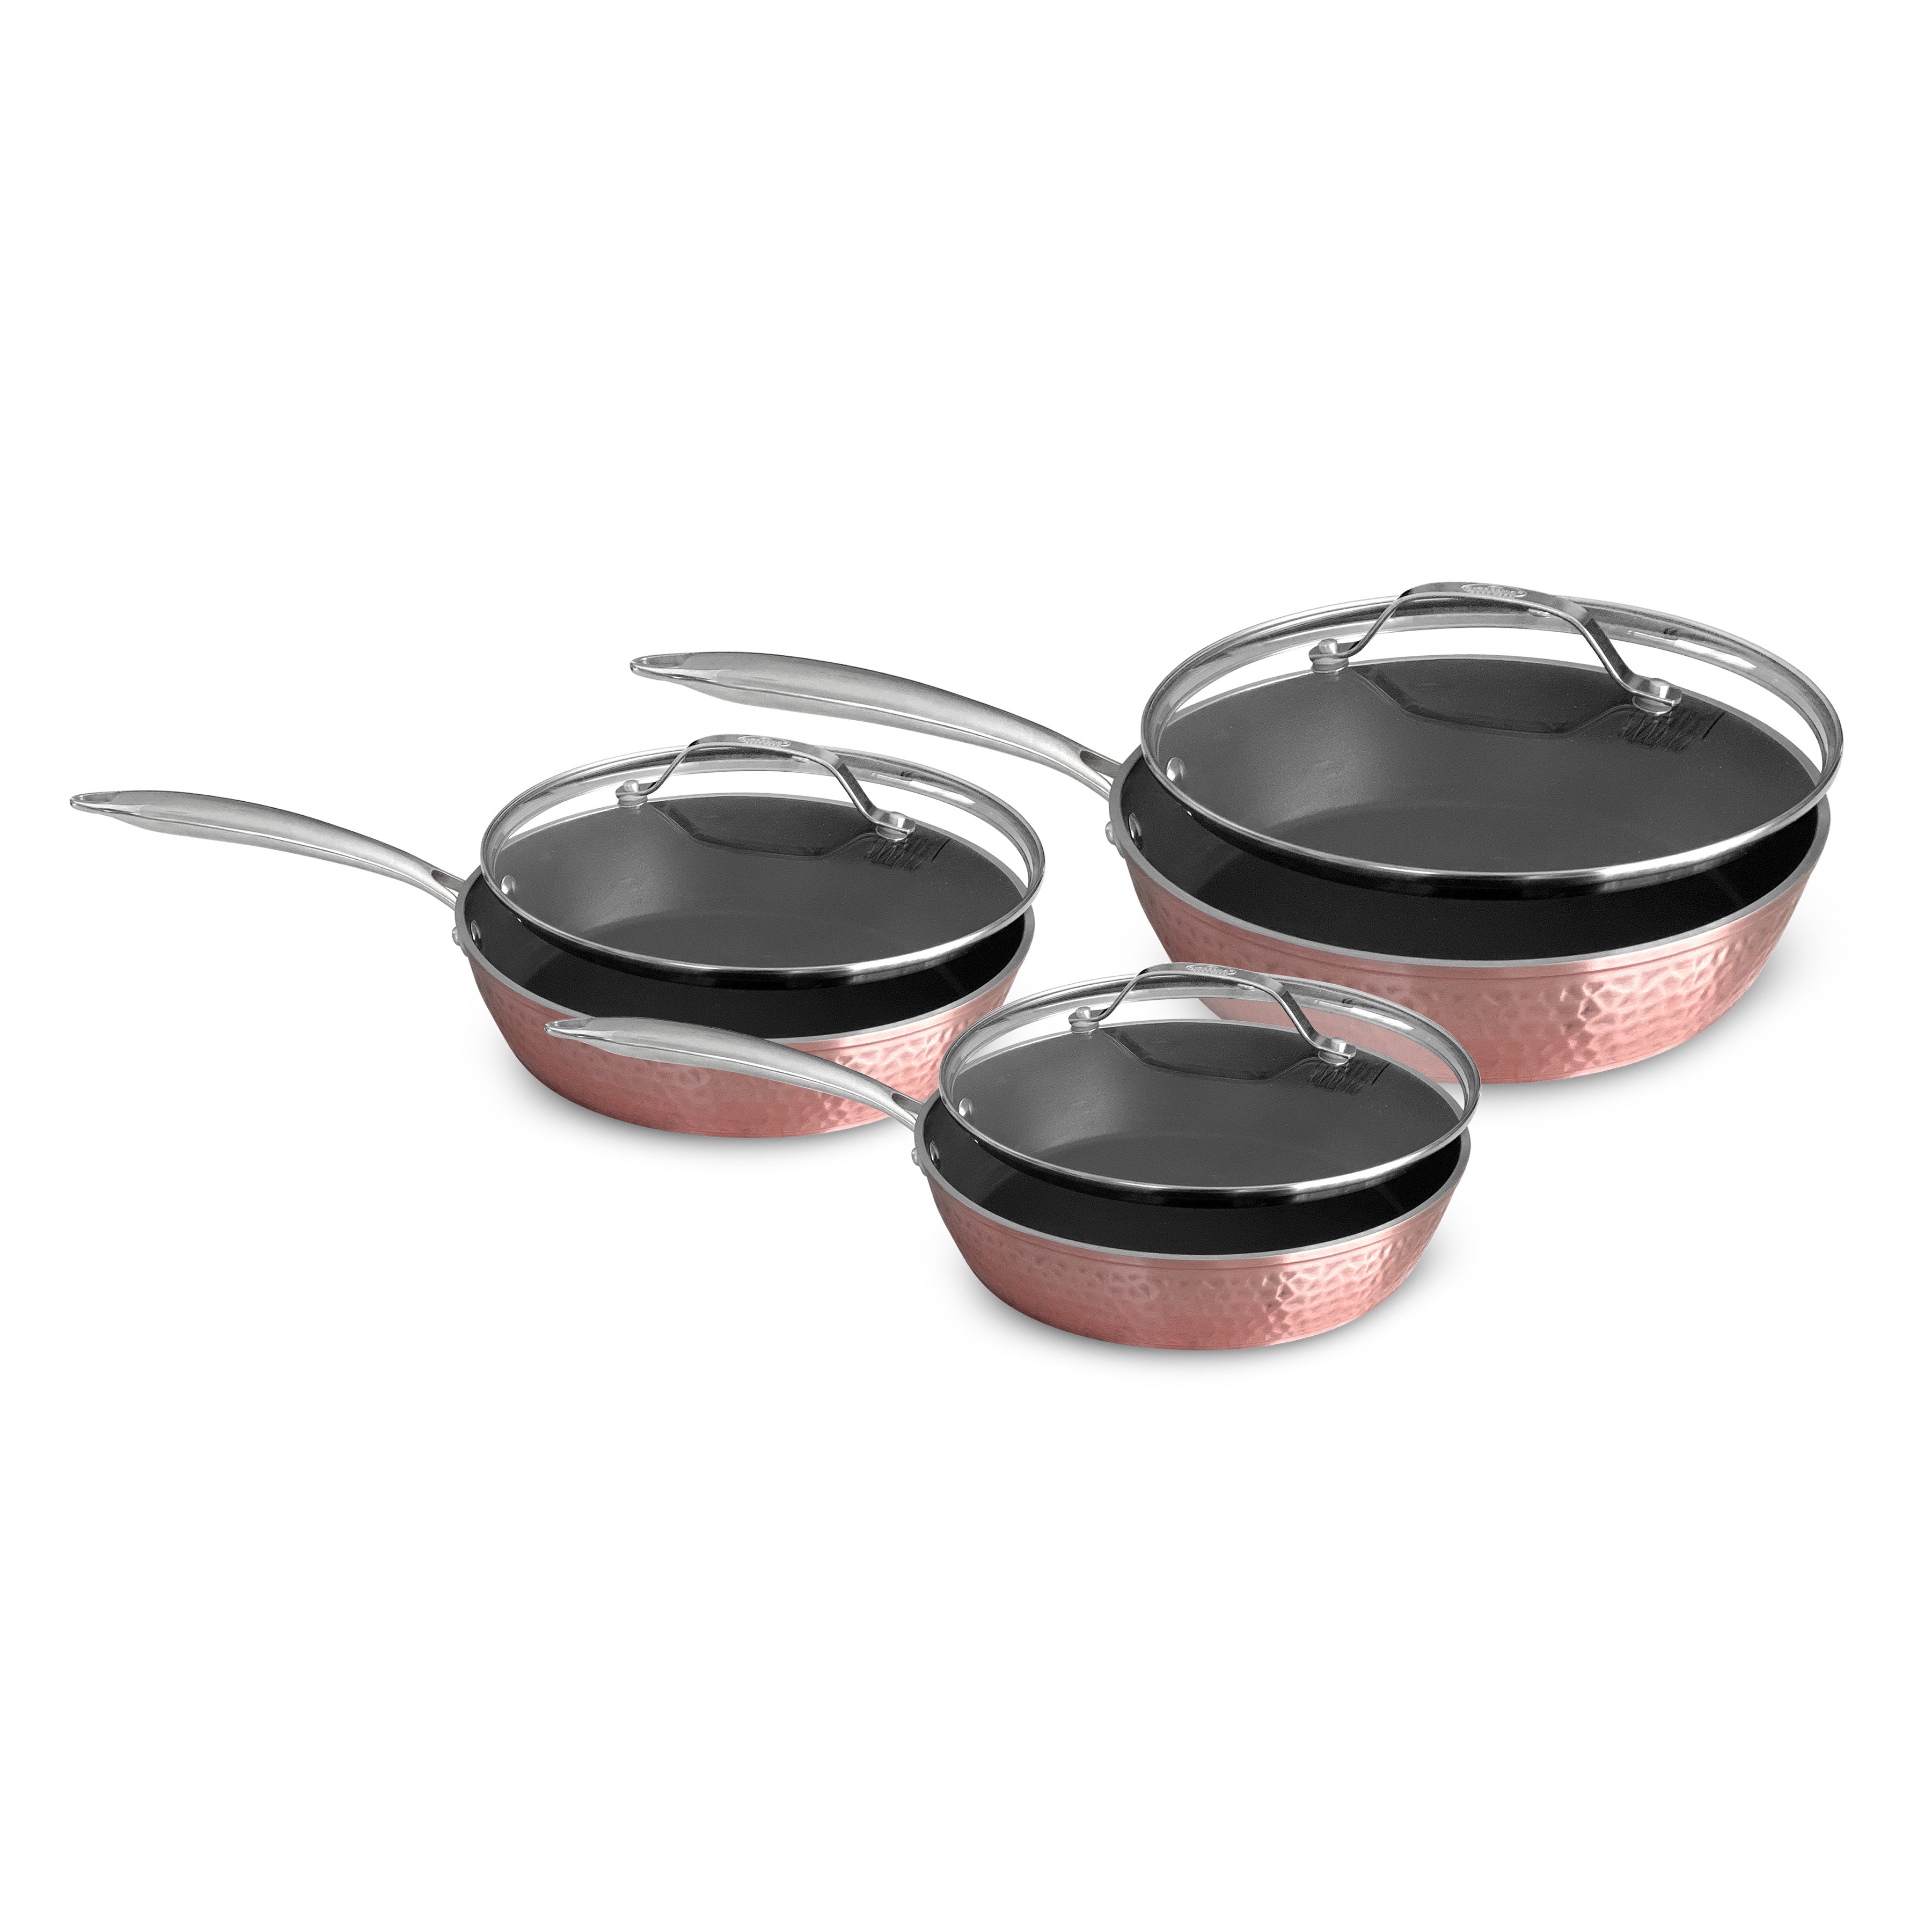 Orgreenic Ceramic Pan for Cooking - 10 Inch Non Stick Pan, Rose Hammered  Cookware, Elegantly Designed, Lightweight & Durable for All Stove Top